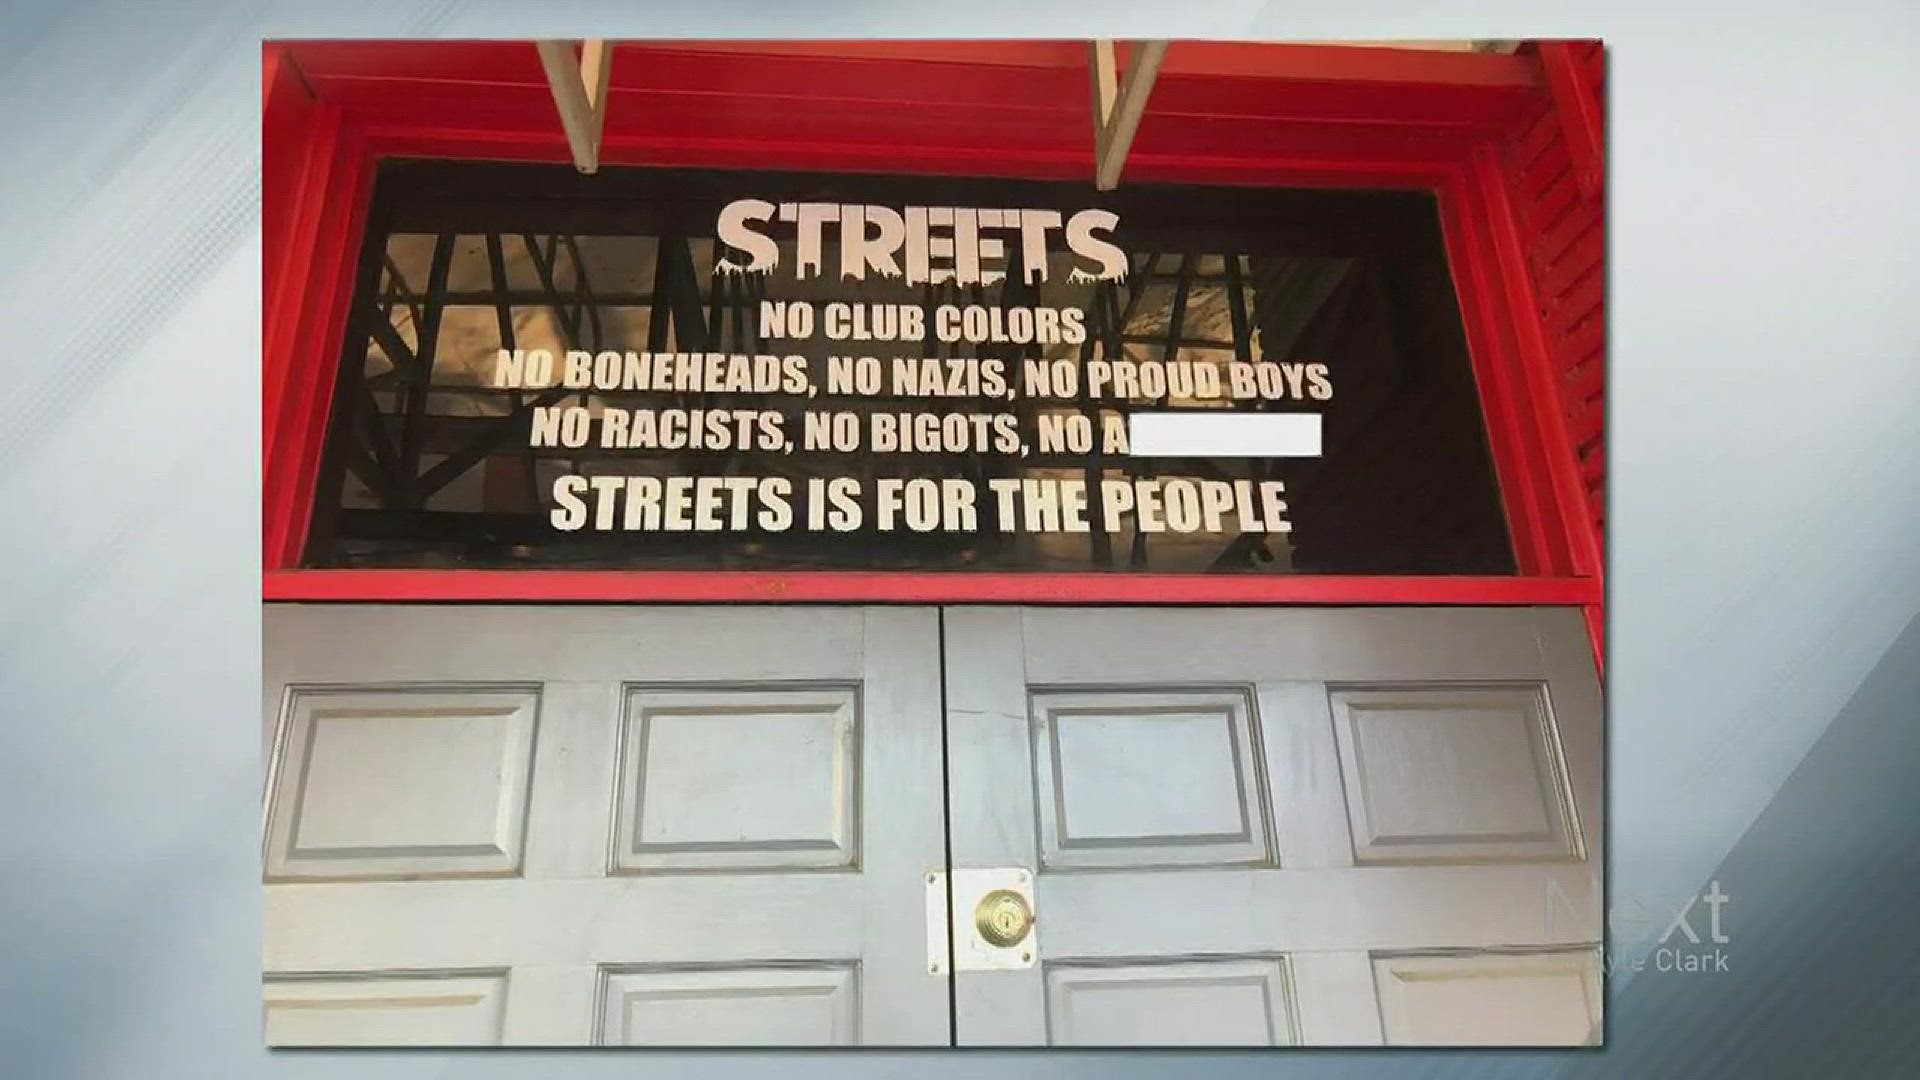 Streets of London on Colfax has a new owner, who wants to make it clear that any Nazis who enter his bar or cause trouble will be kicked out. He said he had to clarify this based on rumors.